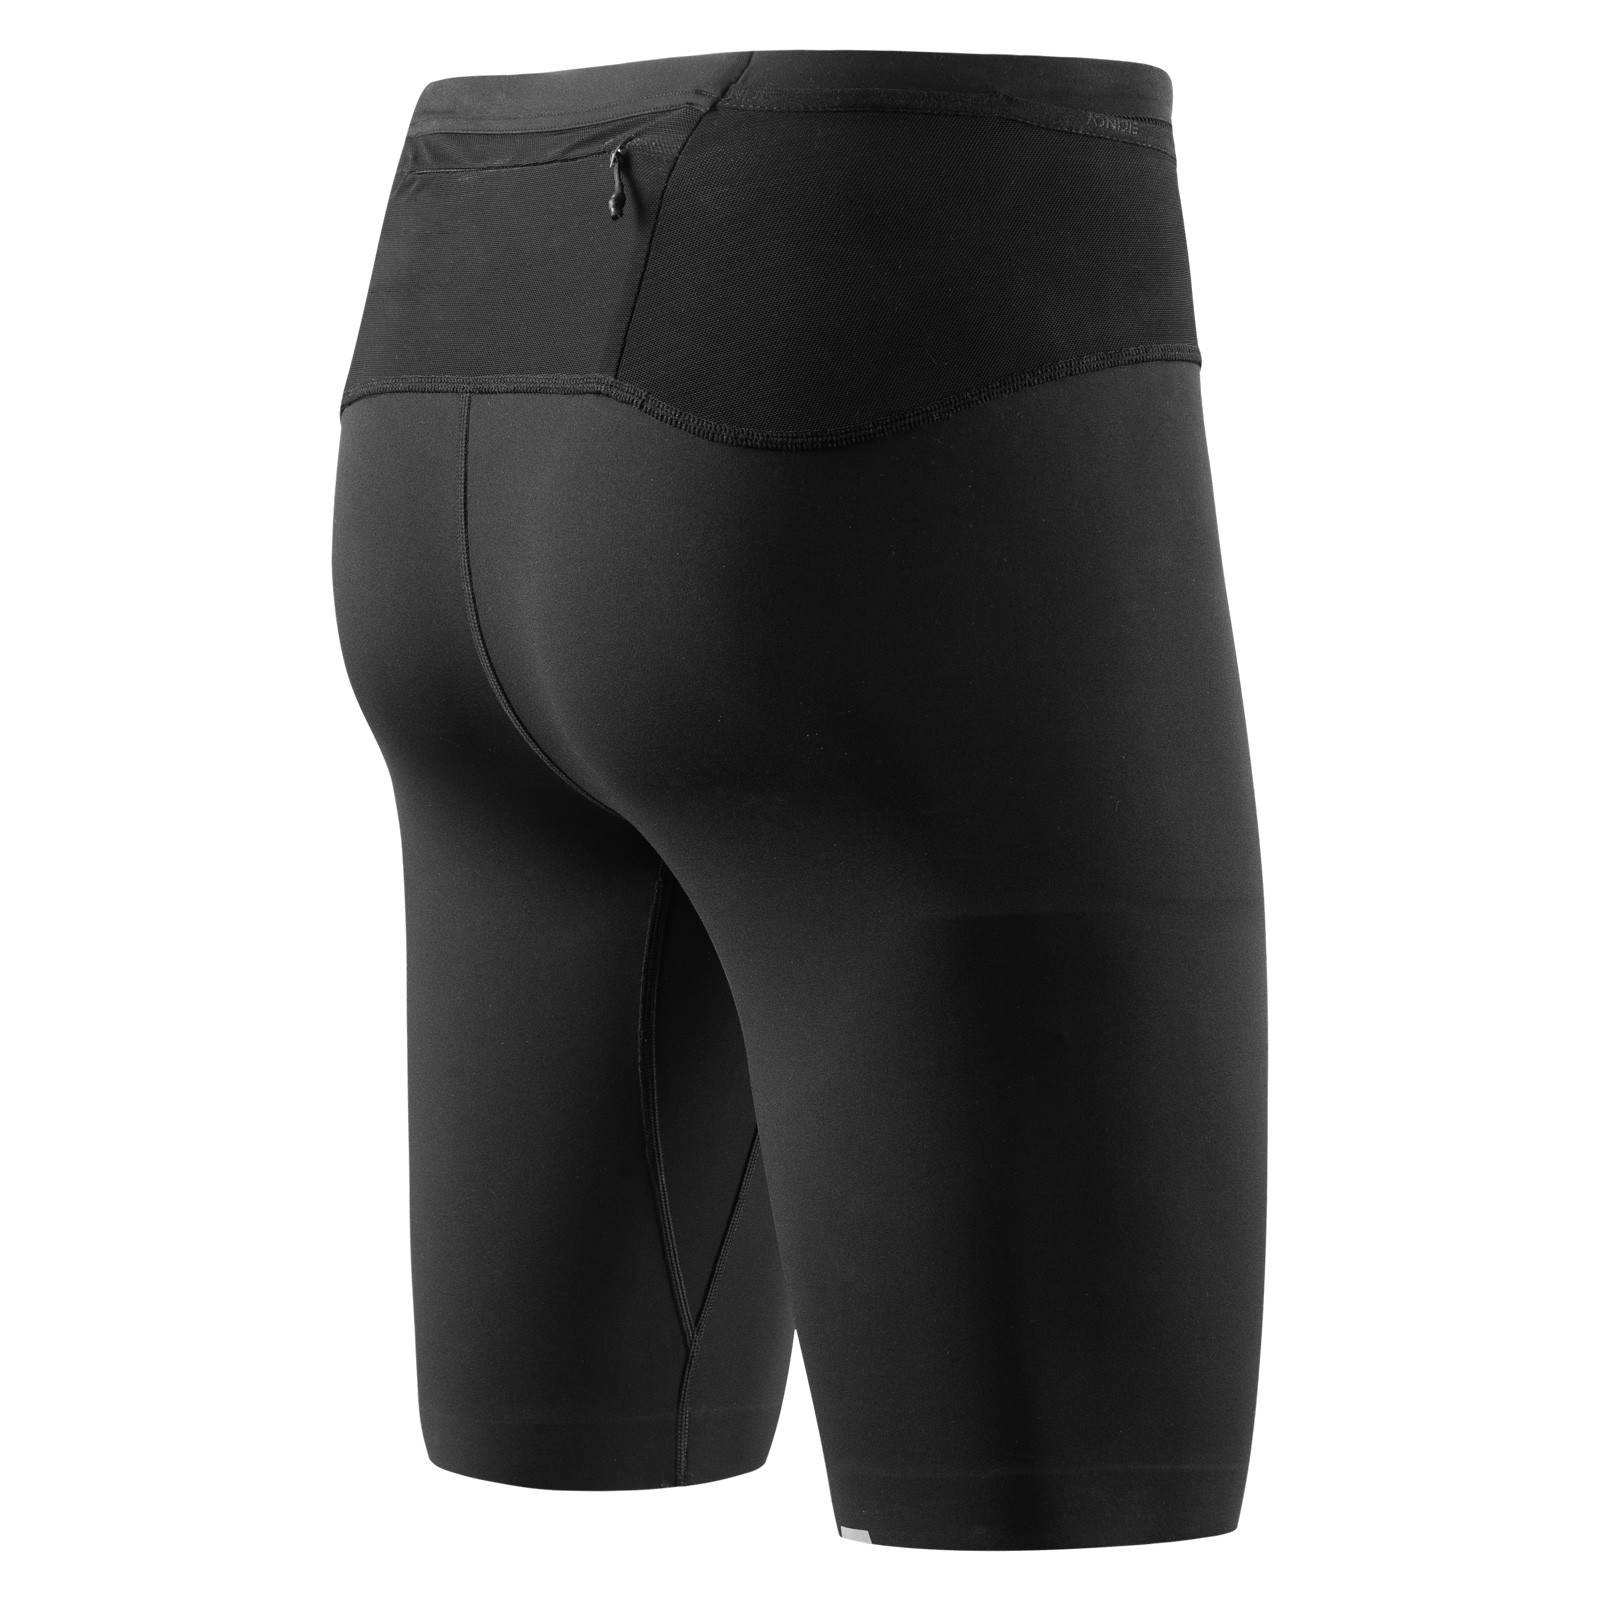 Mens Athletic Compression Pants For Running, Basketball, Gym